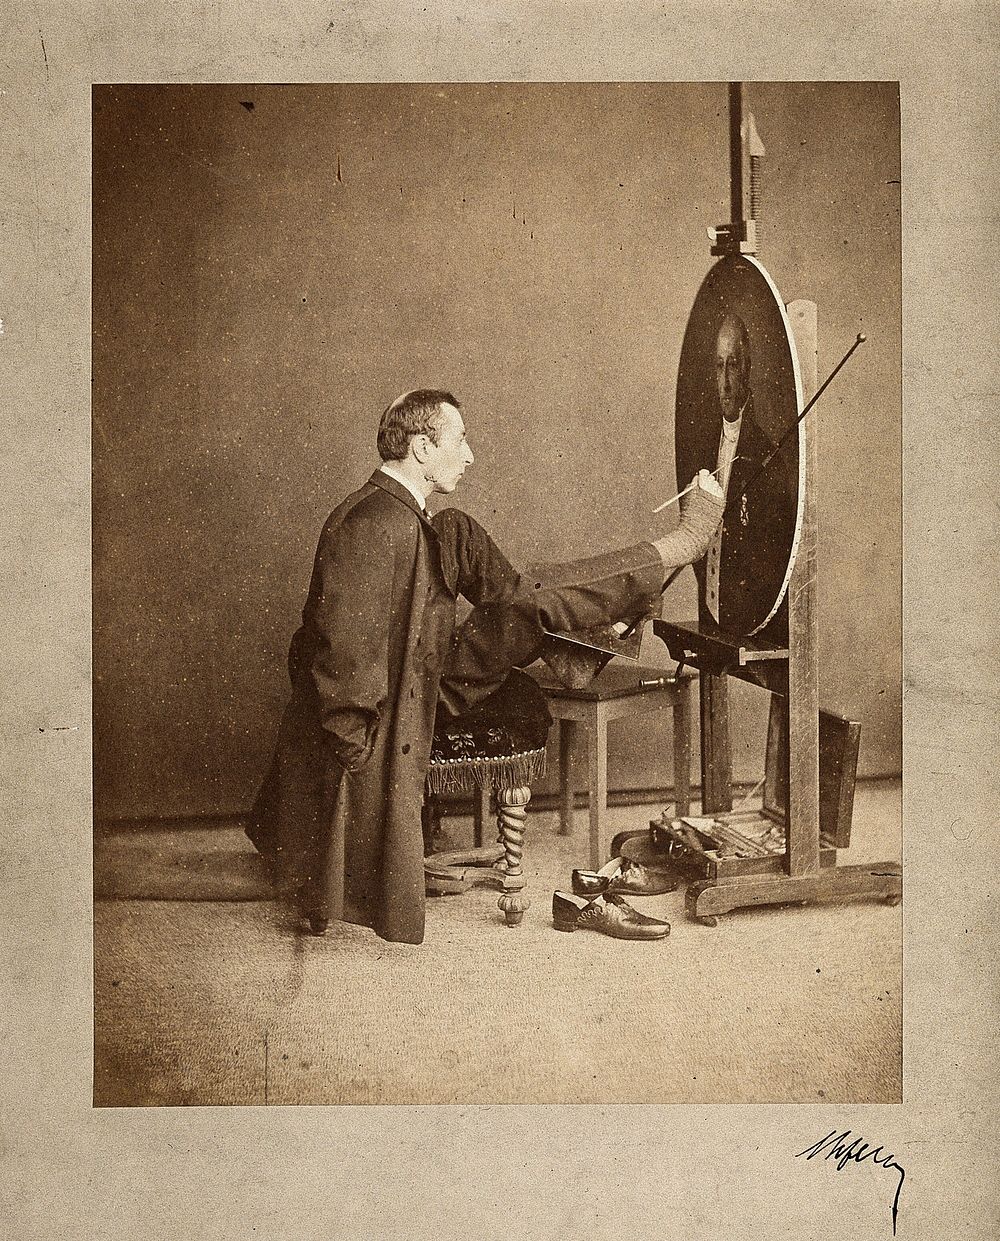 A man painting an oval portrait using his feet. Photograph by J. Dupont, c. 1870.